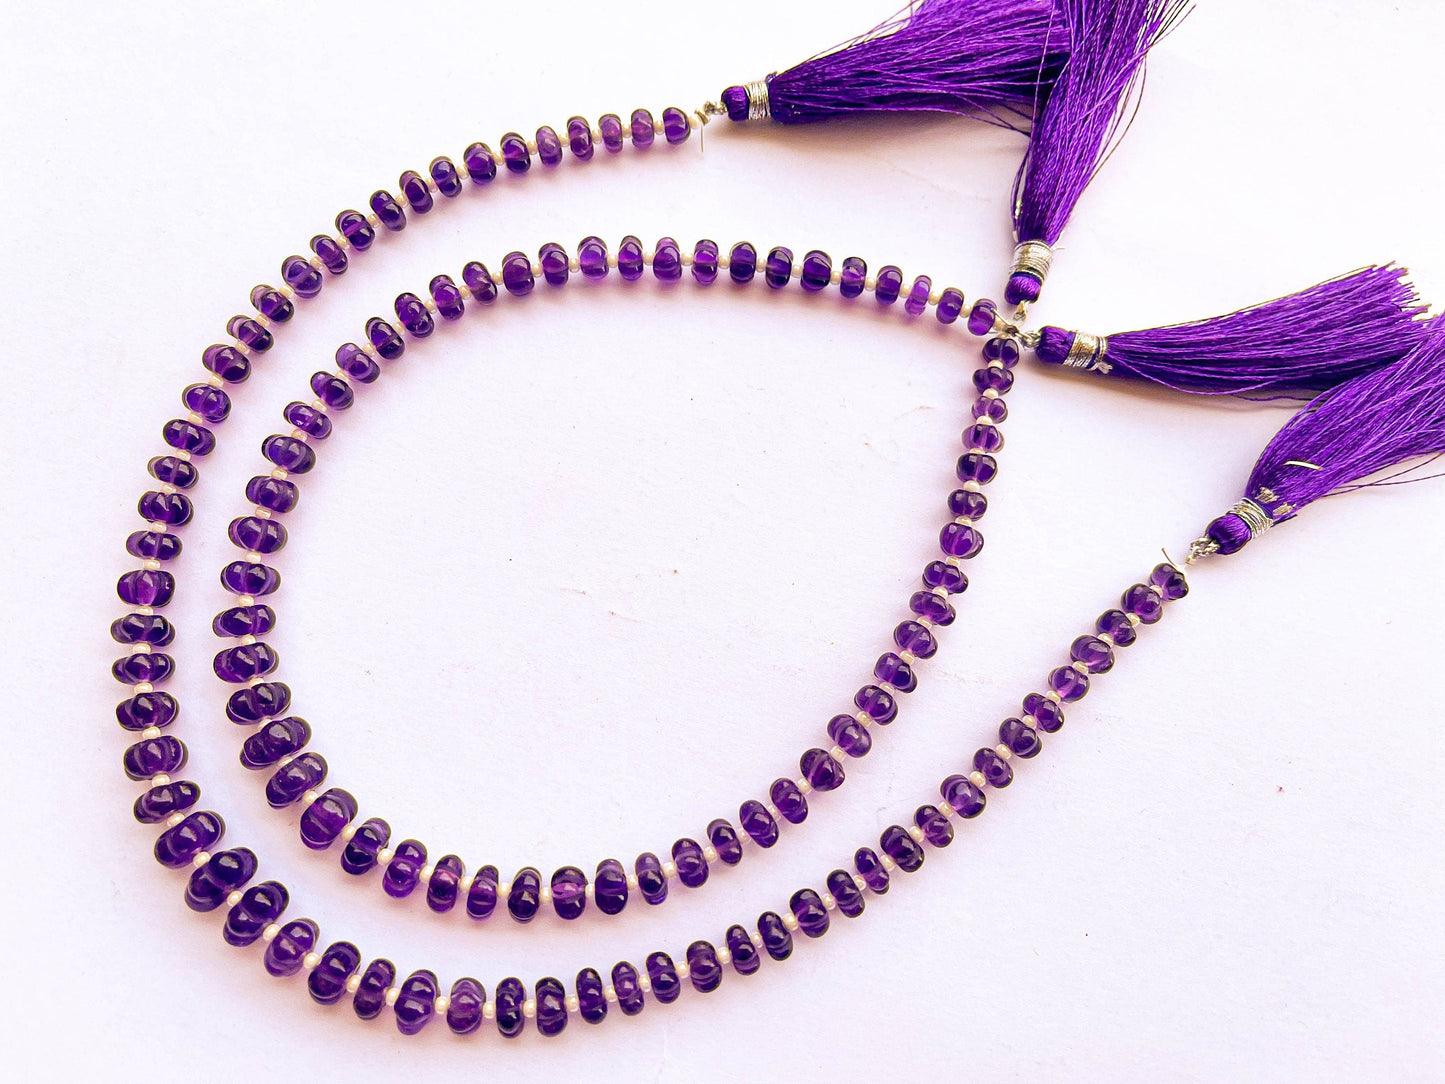 55 pieces AMETHYST Carved Melons beads, Natural Amethyst Beads, Amethyst Carving, Amethyst Gemstone, Amethyst Melons, 5mm to 8mm, 11 Inches Beadsforyourjewelry